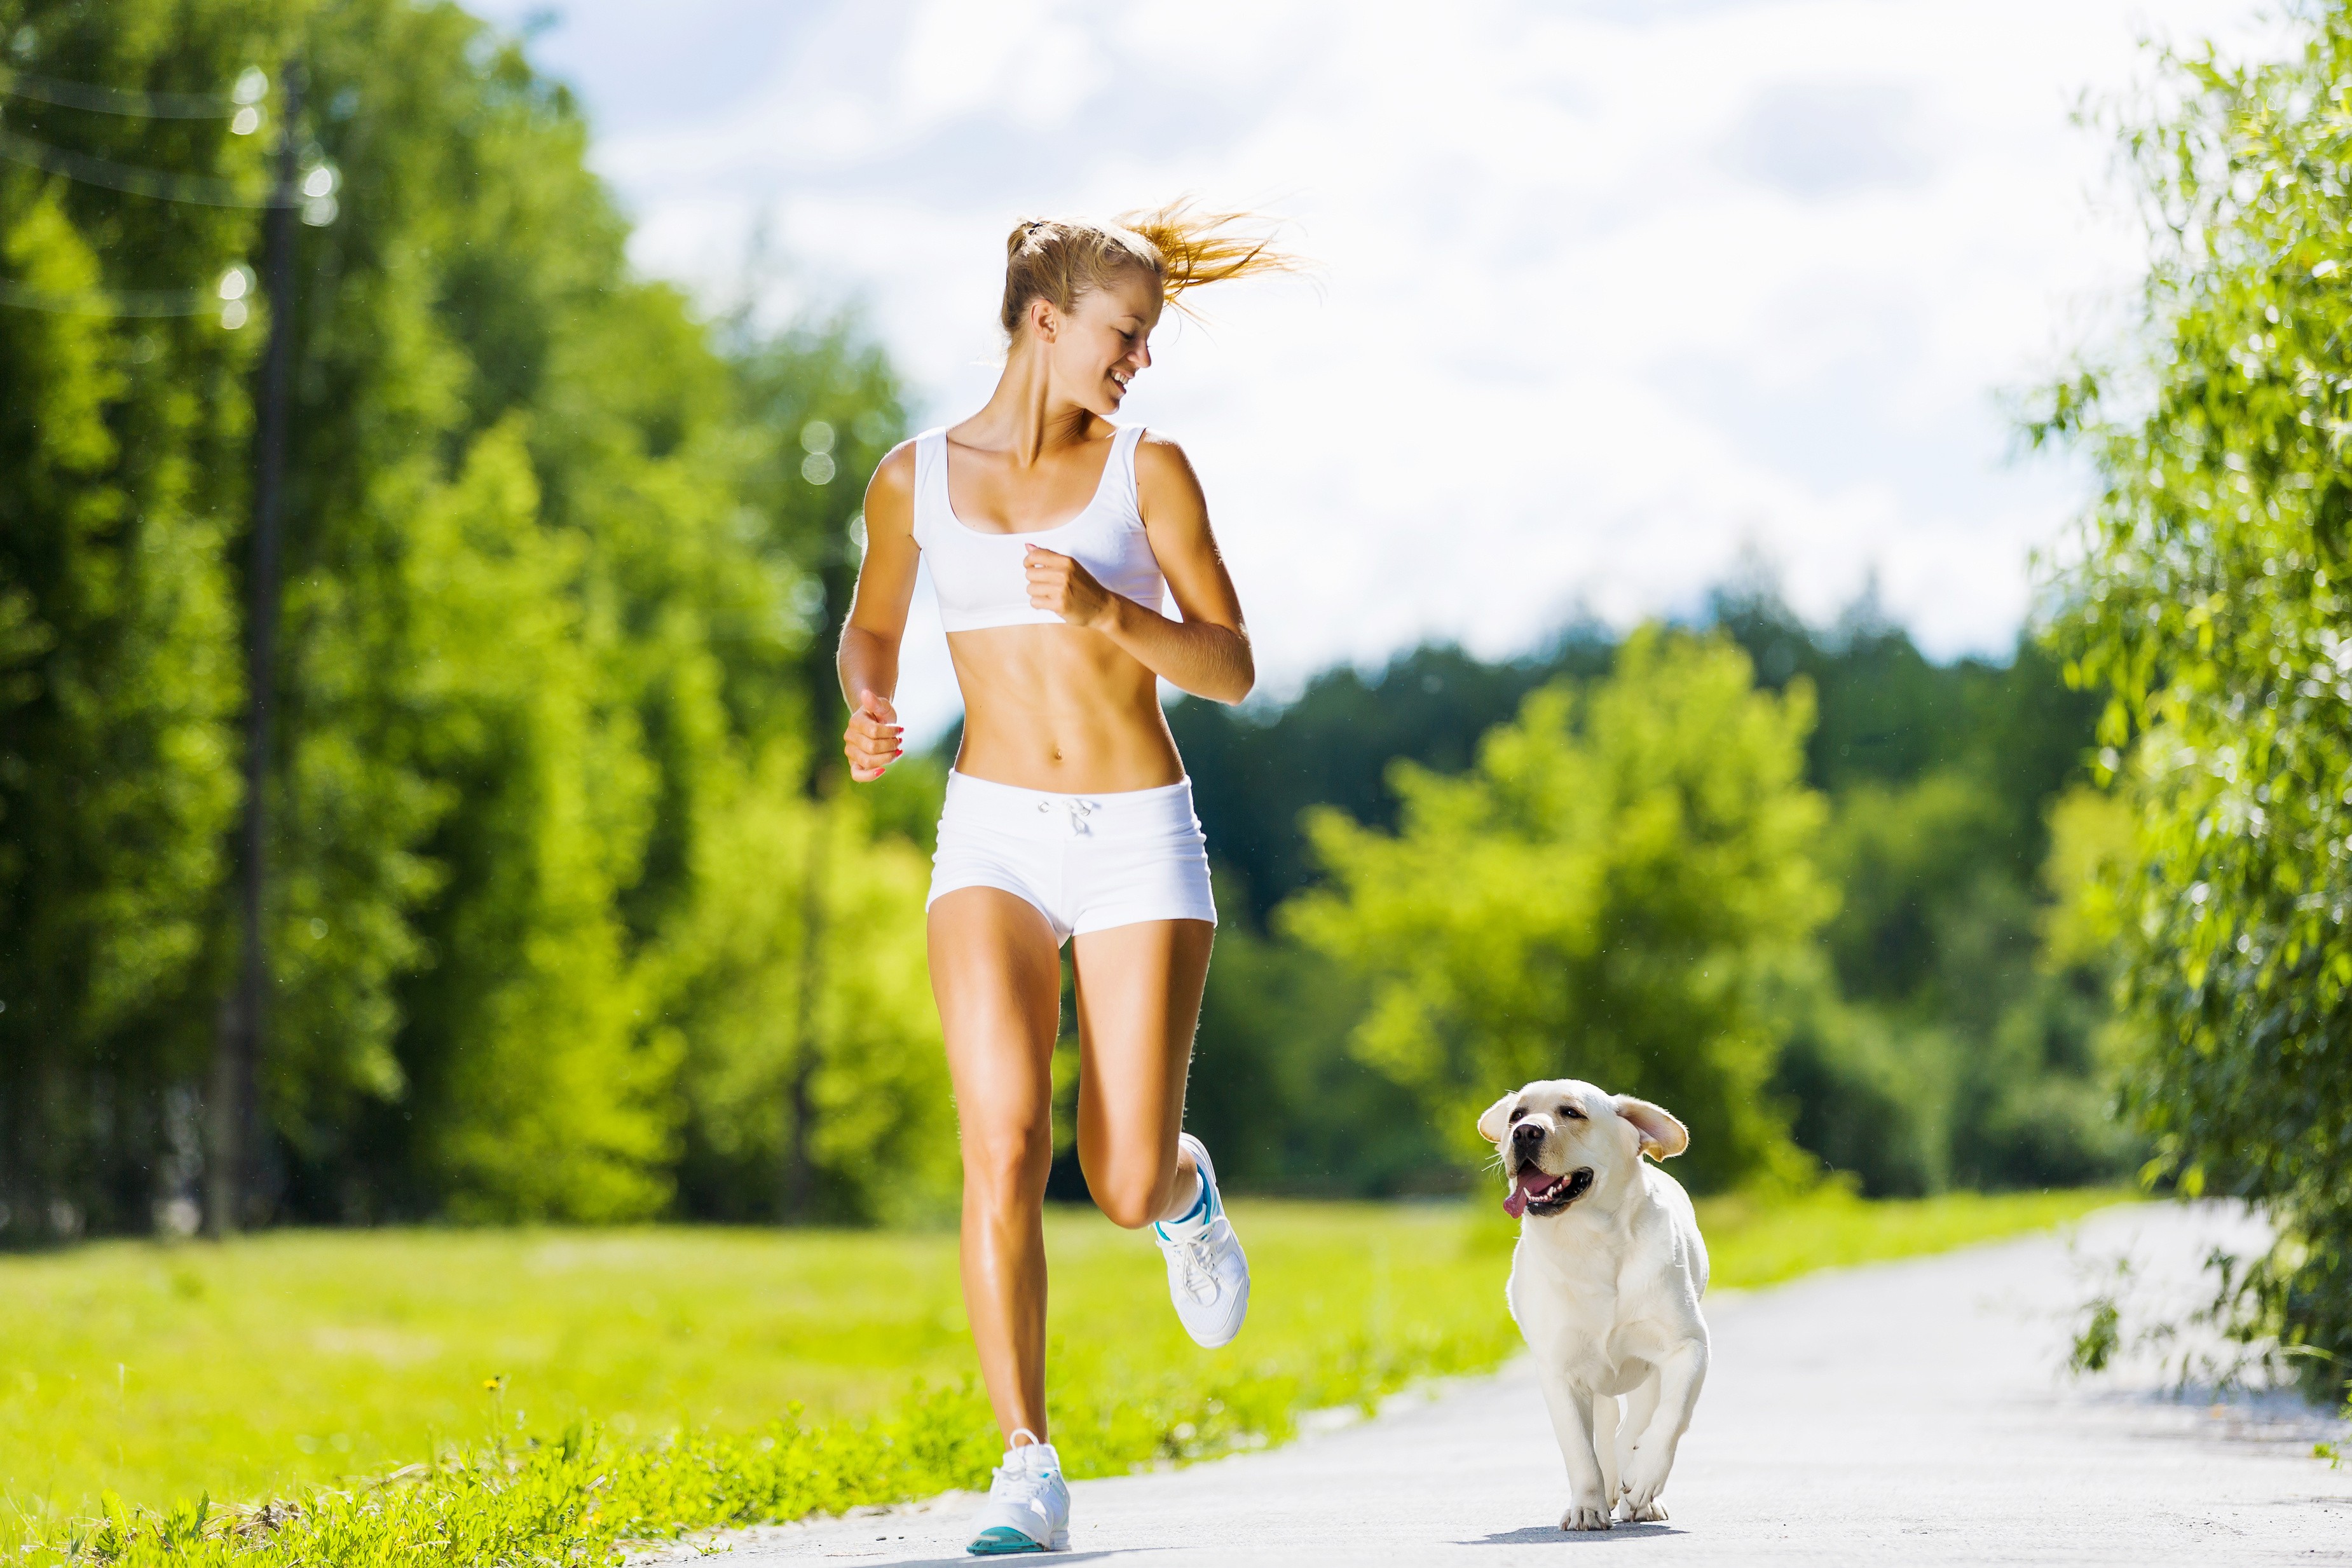 People 3700x2467 women fitness model blonde dog women outdoors running gym clothes sports bra women with dogs socks white socks short socks sneakers shoes white sneakers white shoes depth of field animals mammals working out sport exercise jogging belly